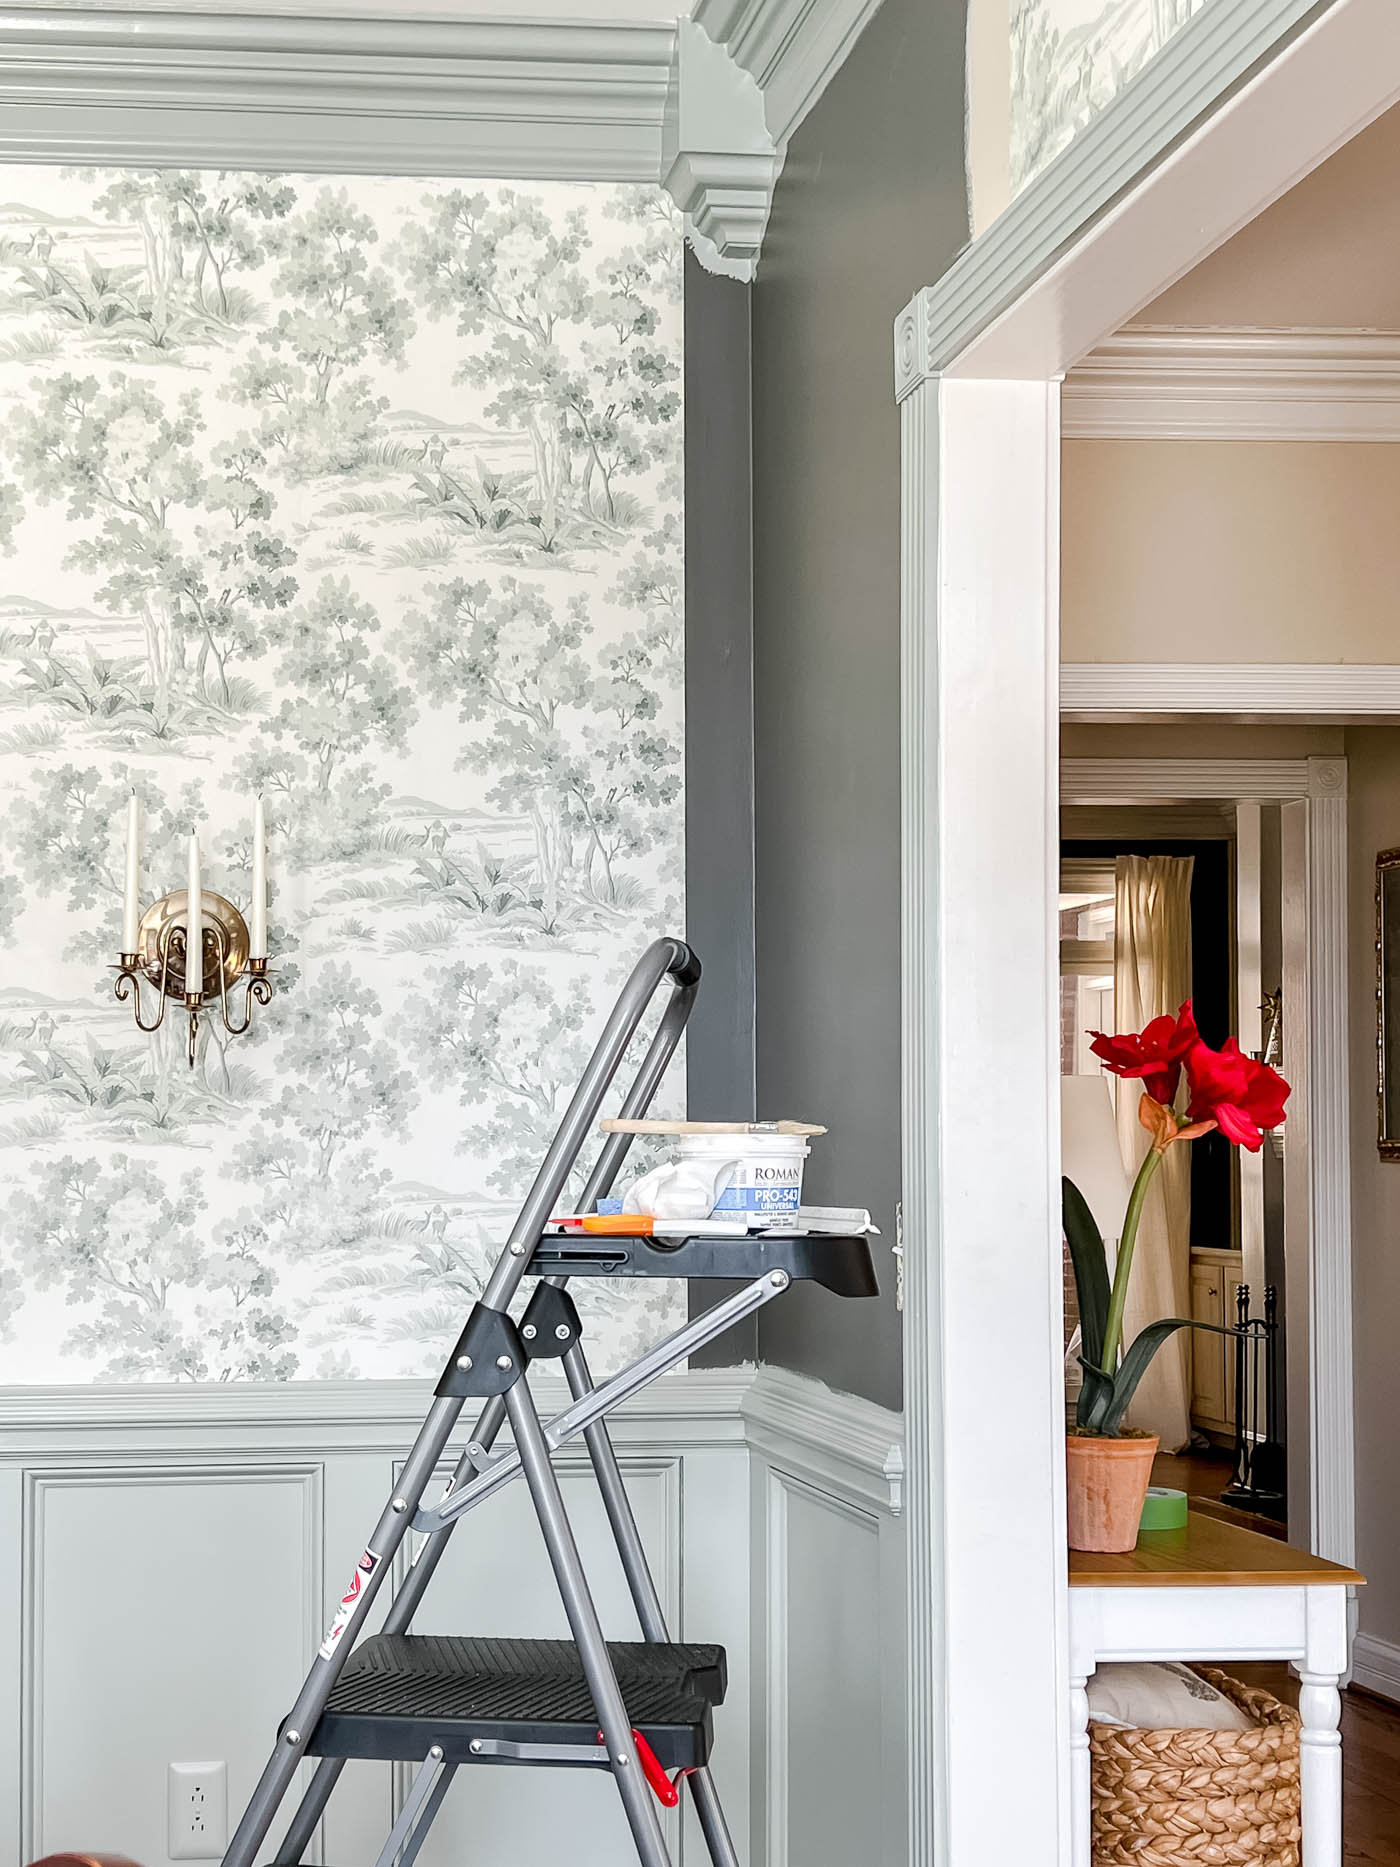 How to Install Paste-on-Wall Wallpaper